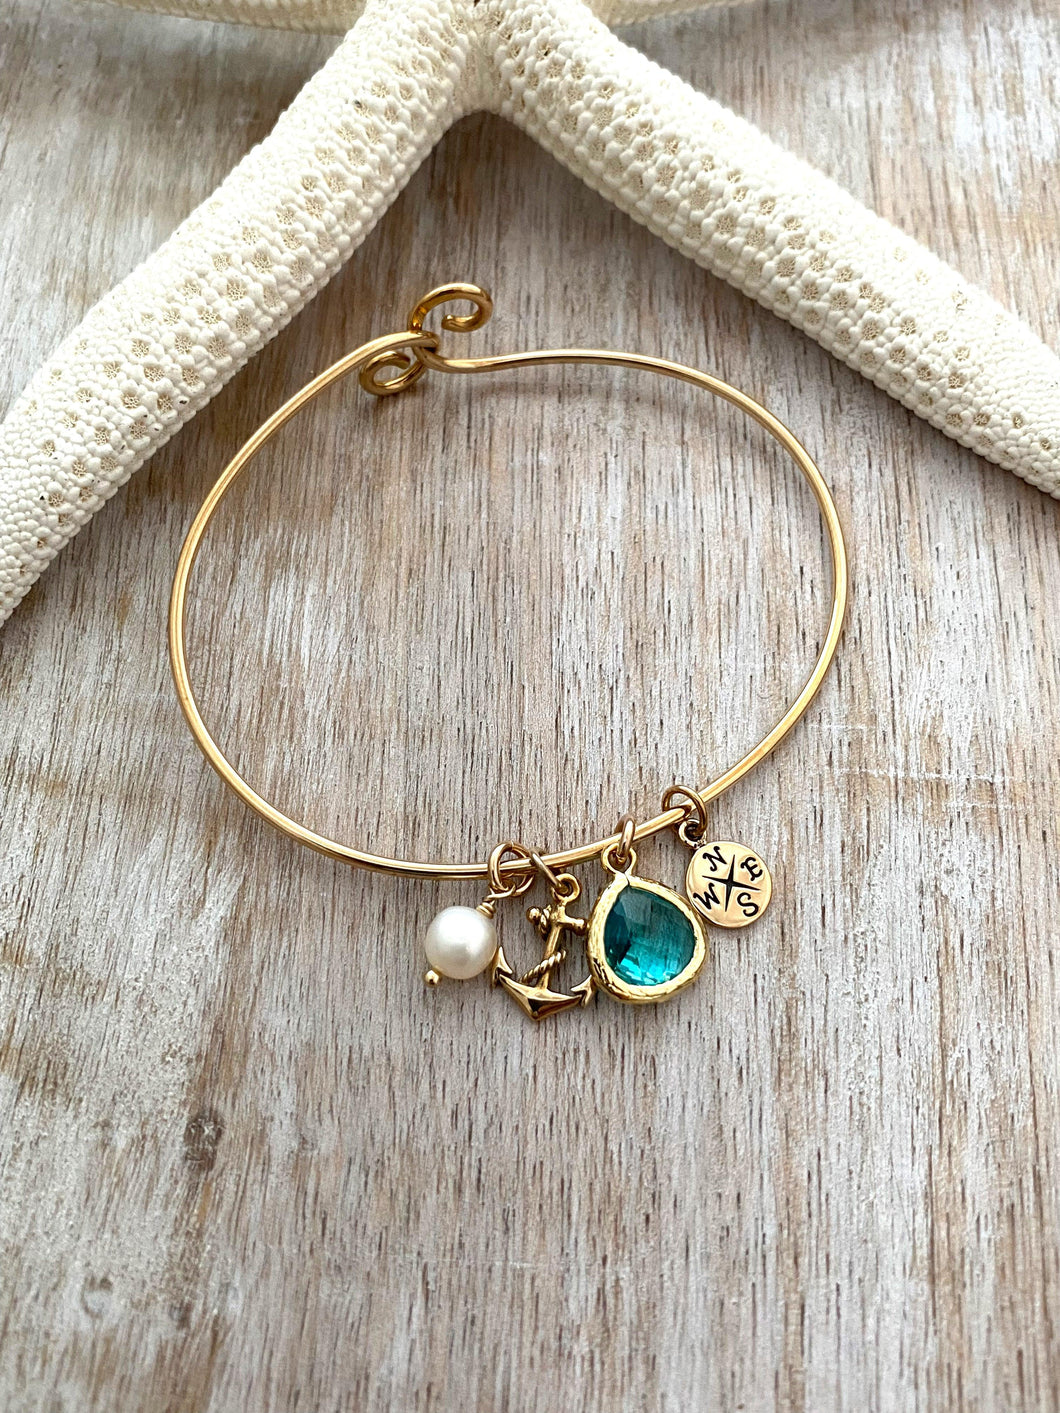 Beach charm bracelet - gold tone bronze hook loop bracelet with anchor and compass charm, teal glass charm and pearl, nautical jewelry - Beach Cove Jewelry